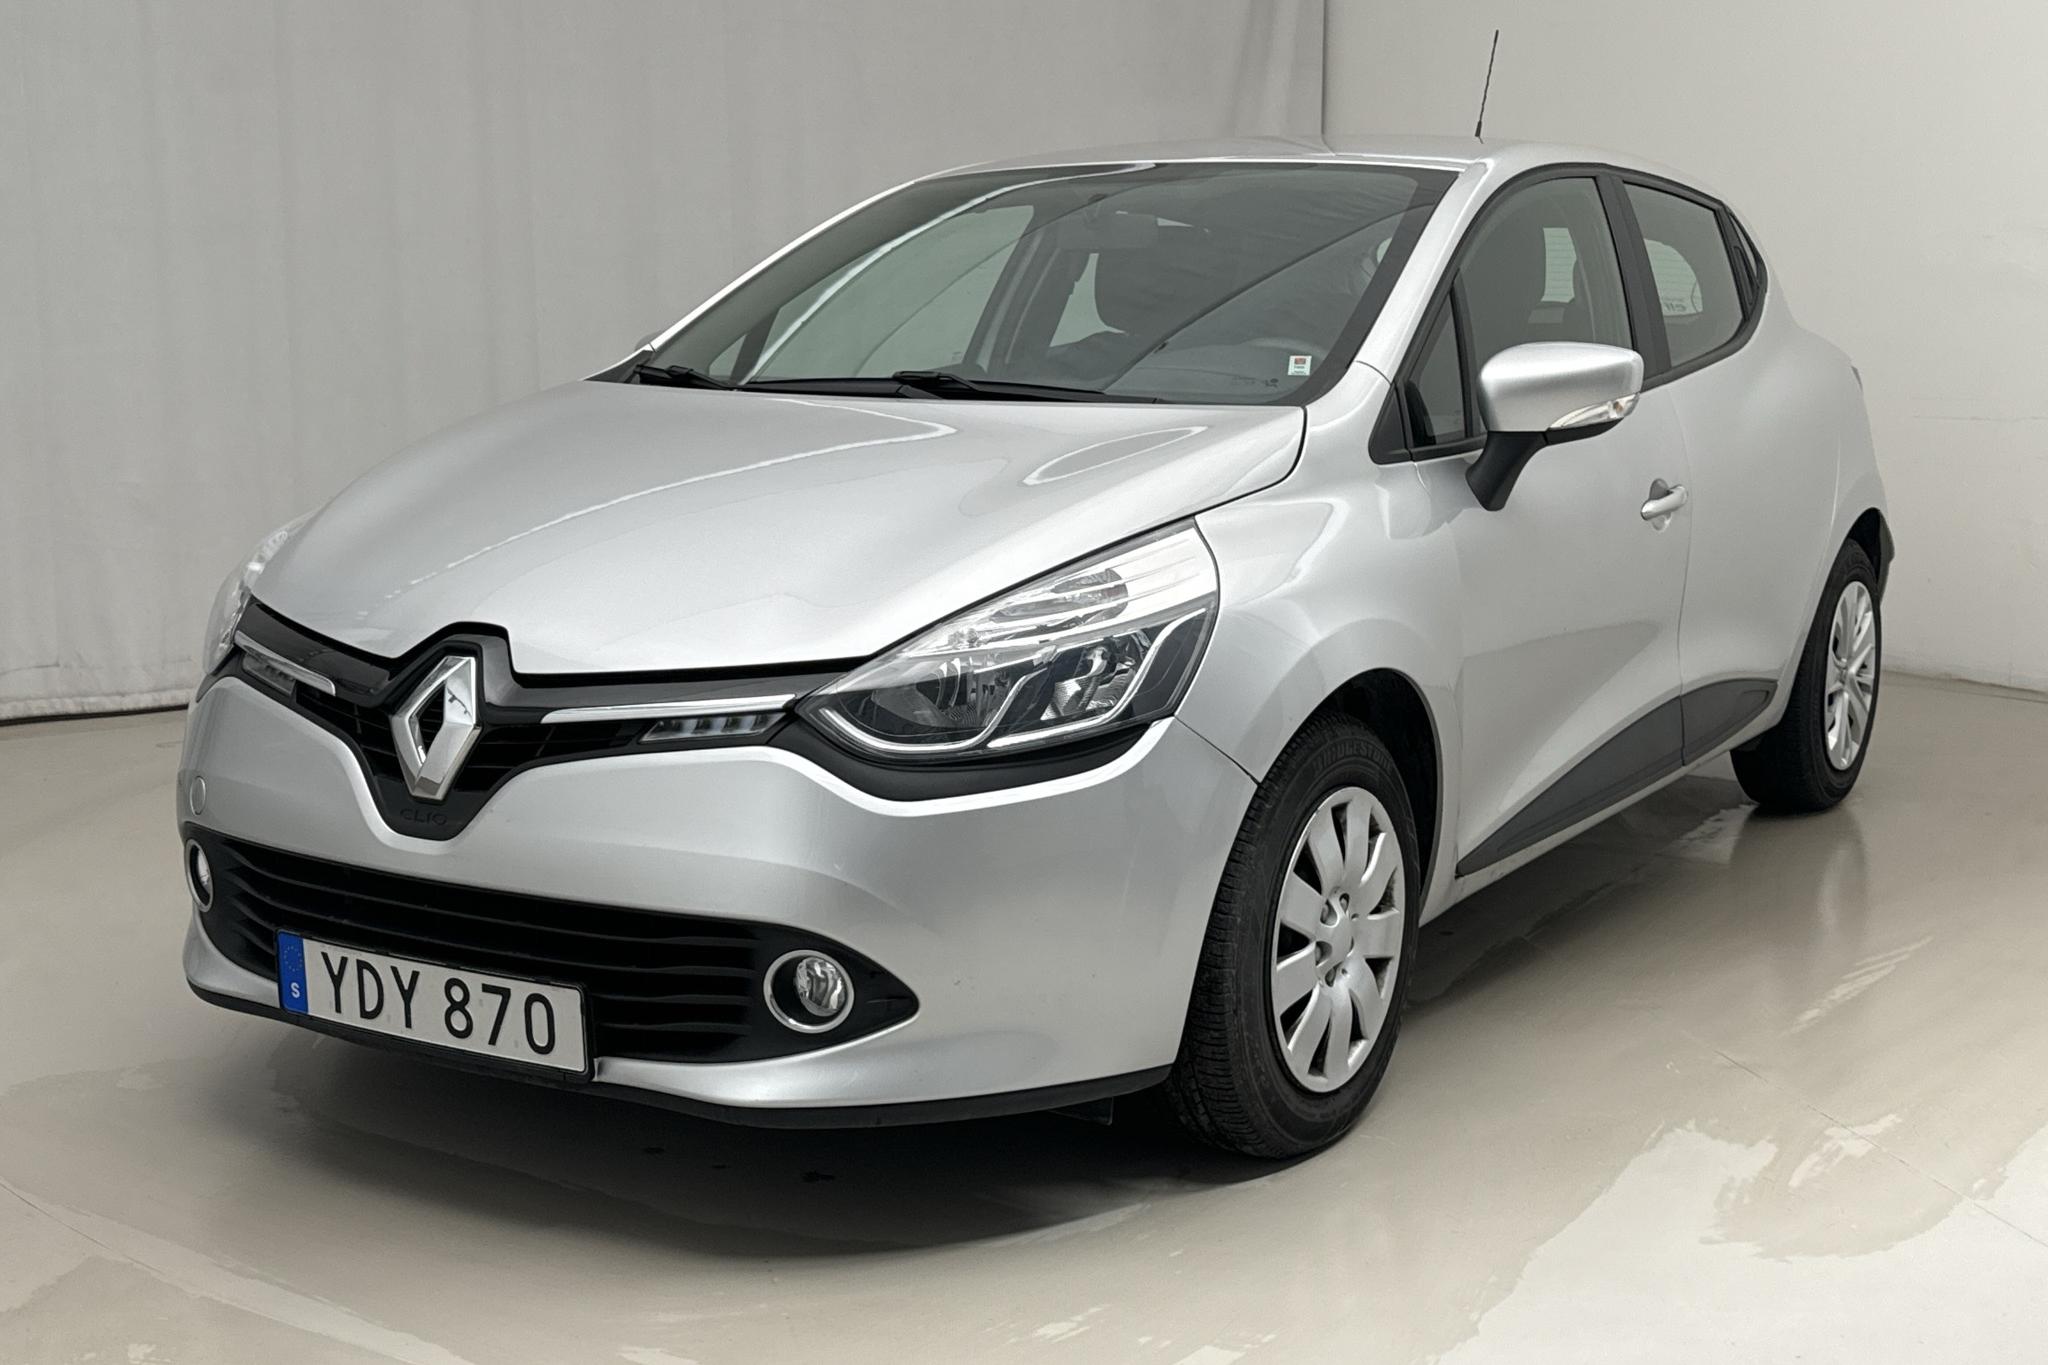 Renault Clio IV 0.9 TCe 90 5dr (90hk) - 7 121 mil - Manuell - silver - 2016